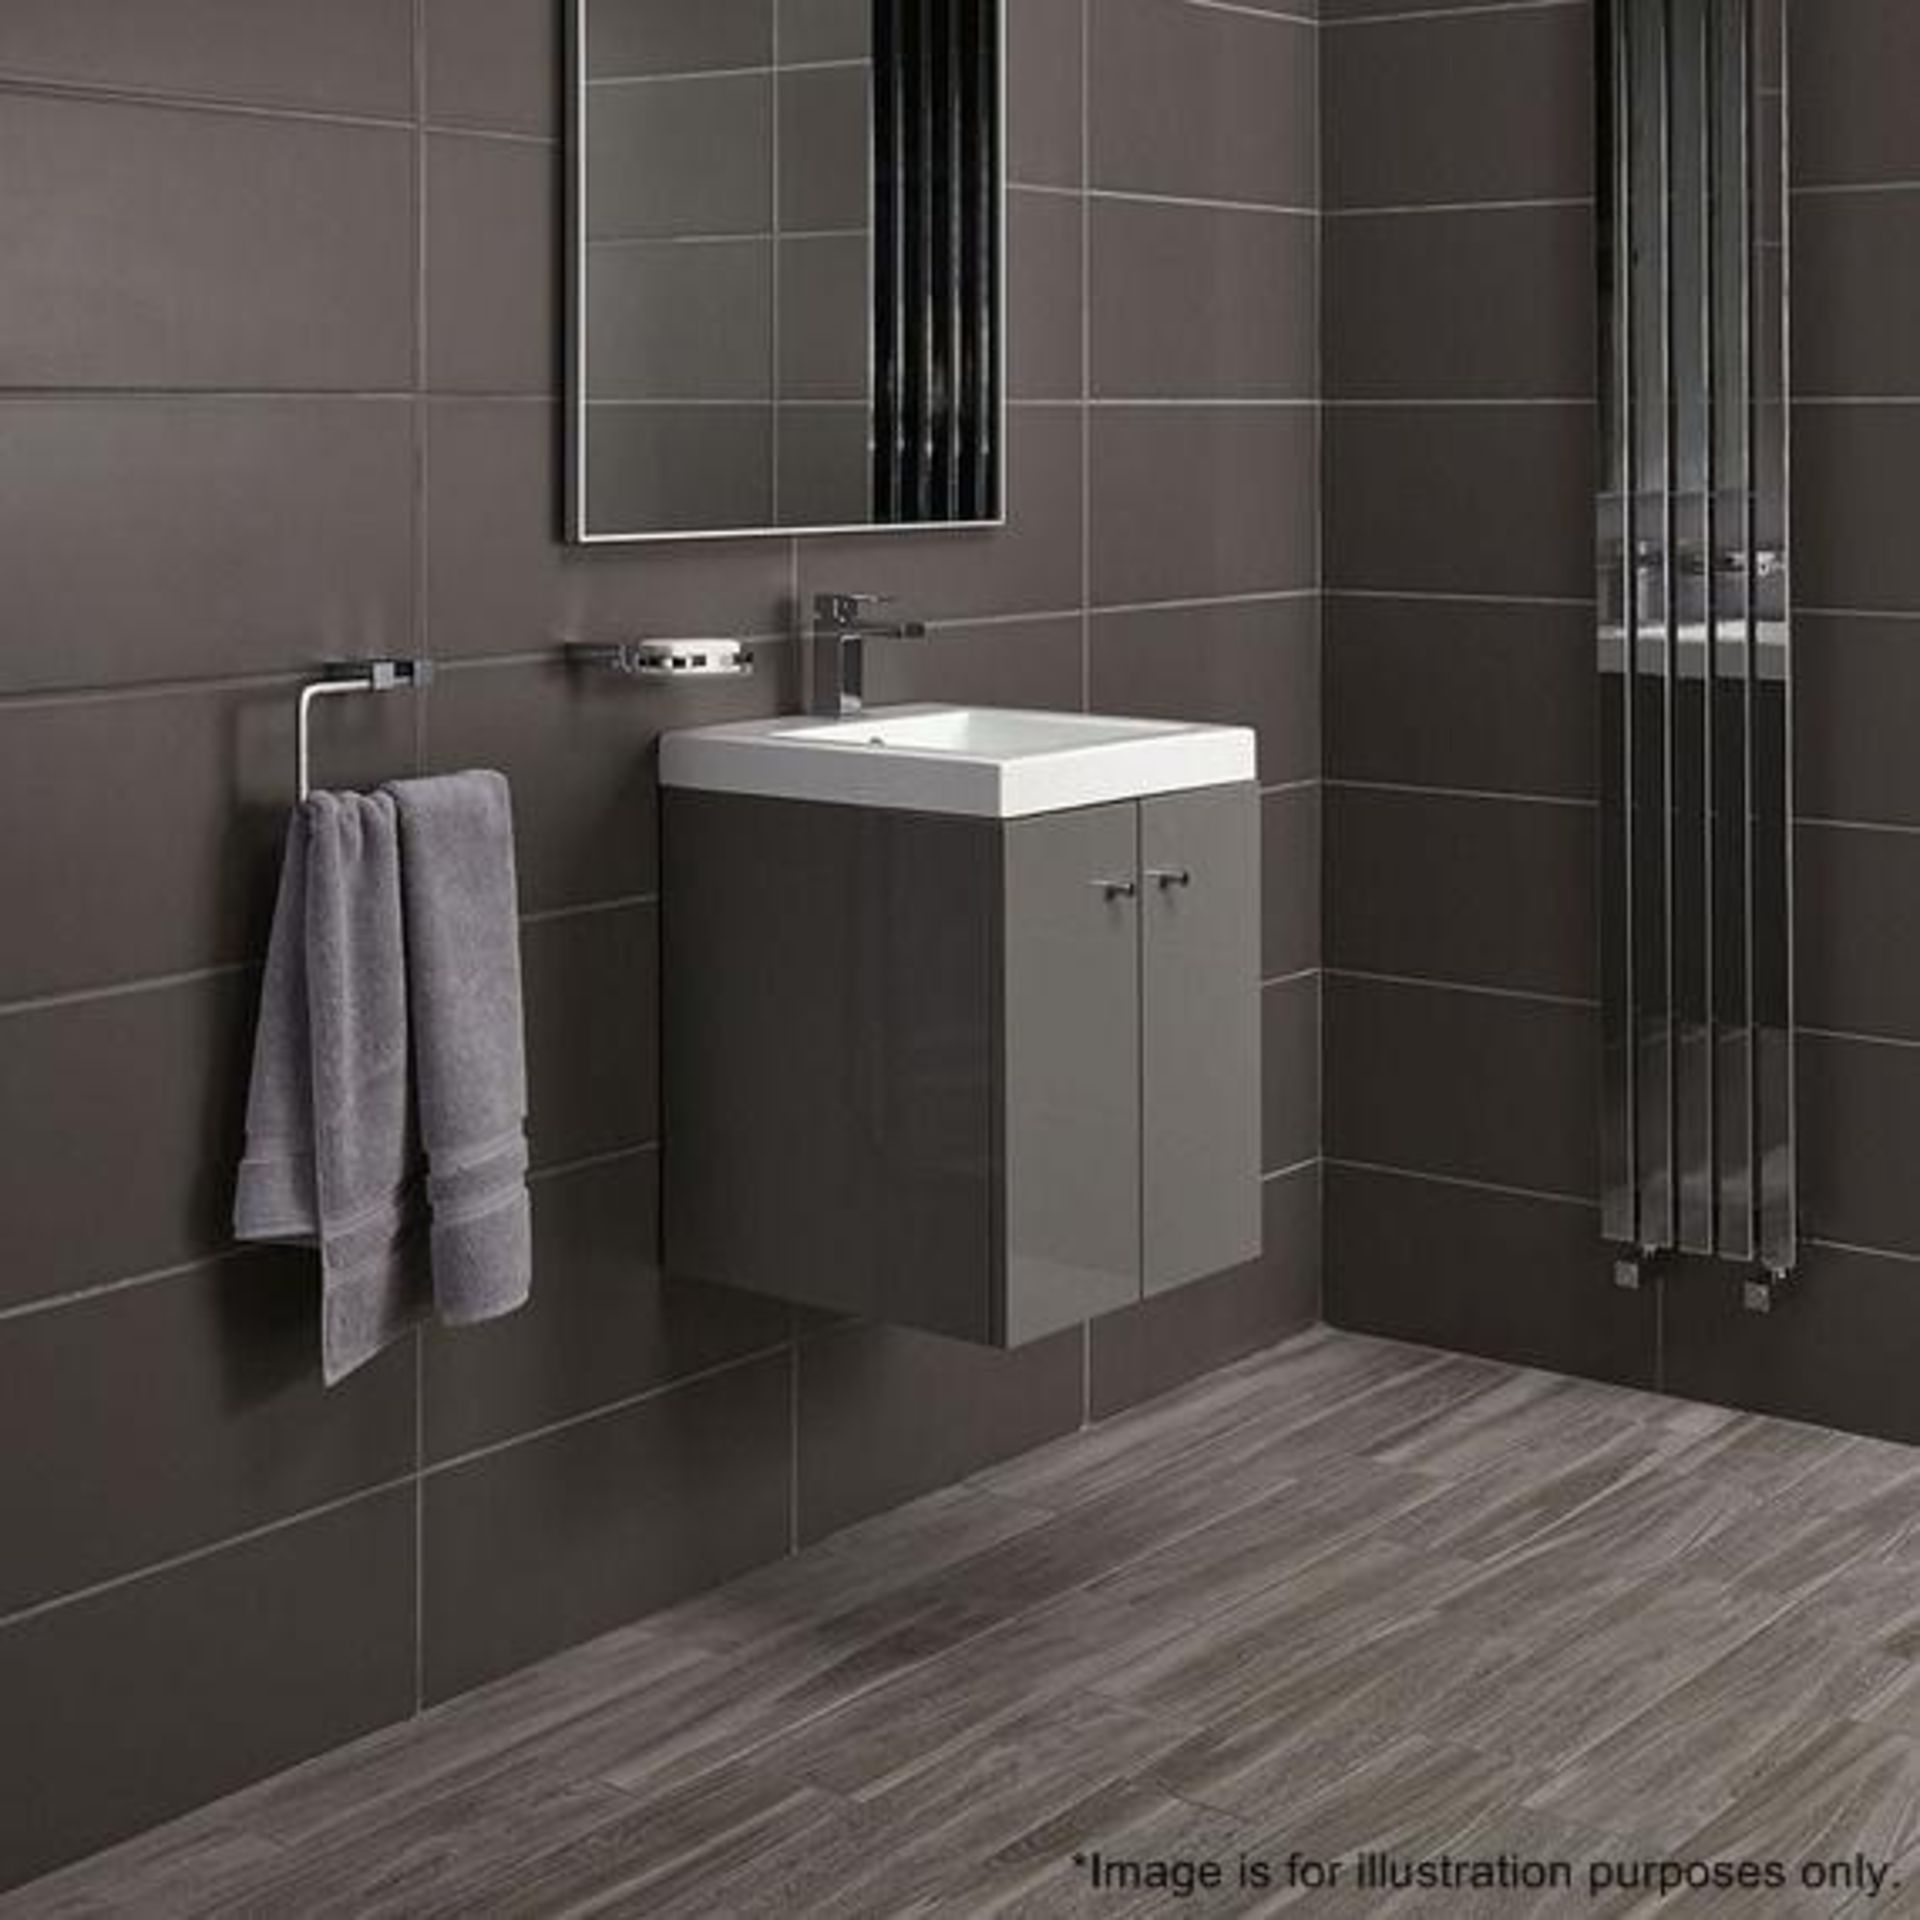 10 x Alpine Duo 400 Wall Hung Vanity Units In Gloss Grey - Brand New Boxed Stock - Dimensions: H49 x - Image 2 of 5